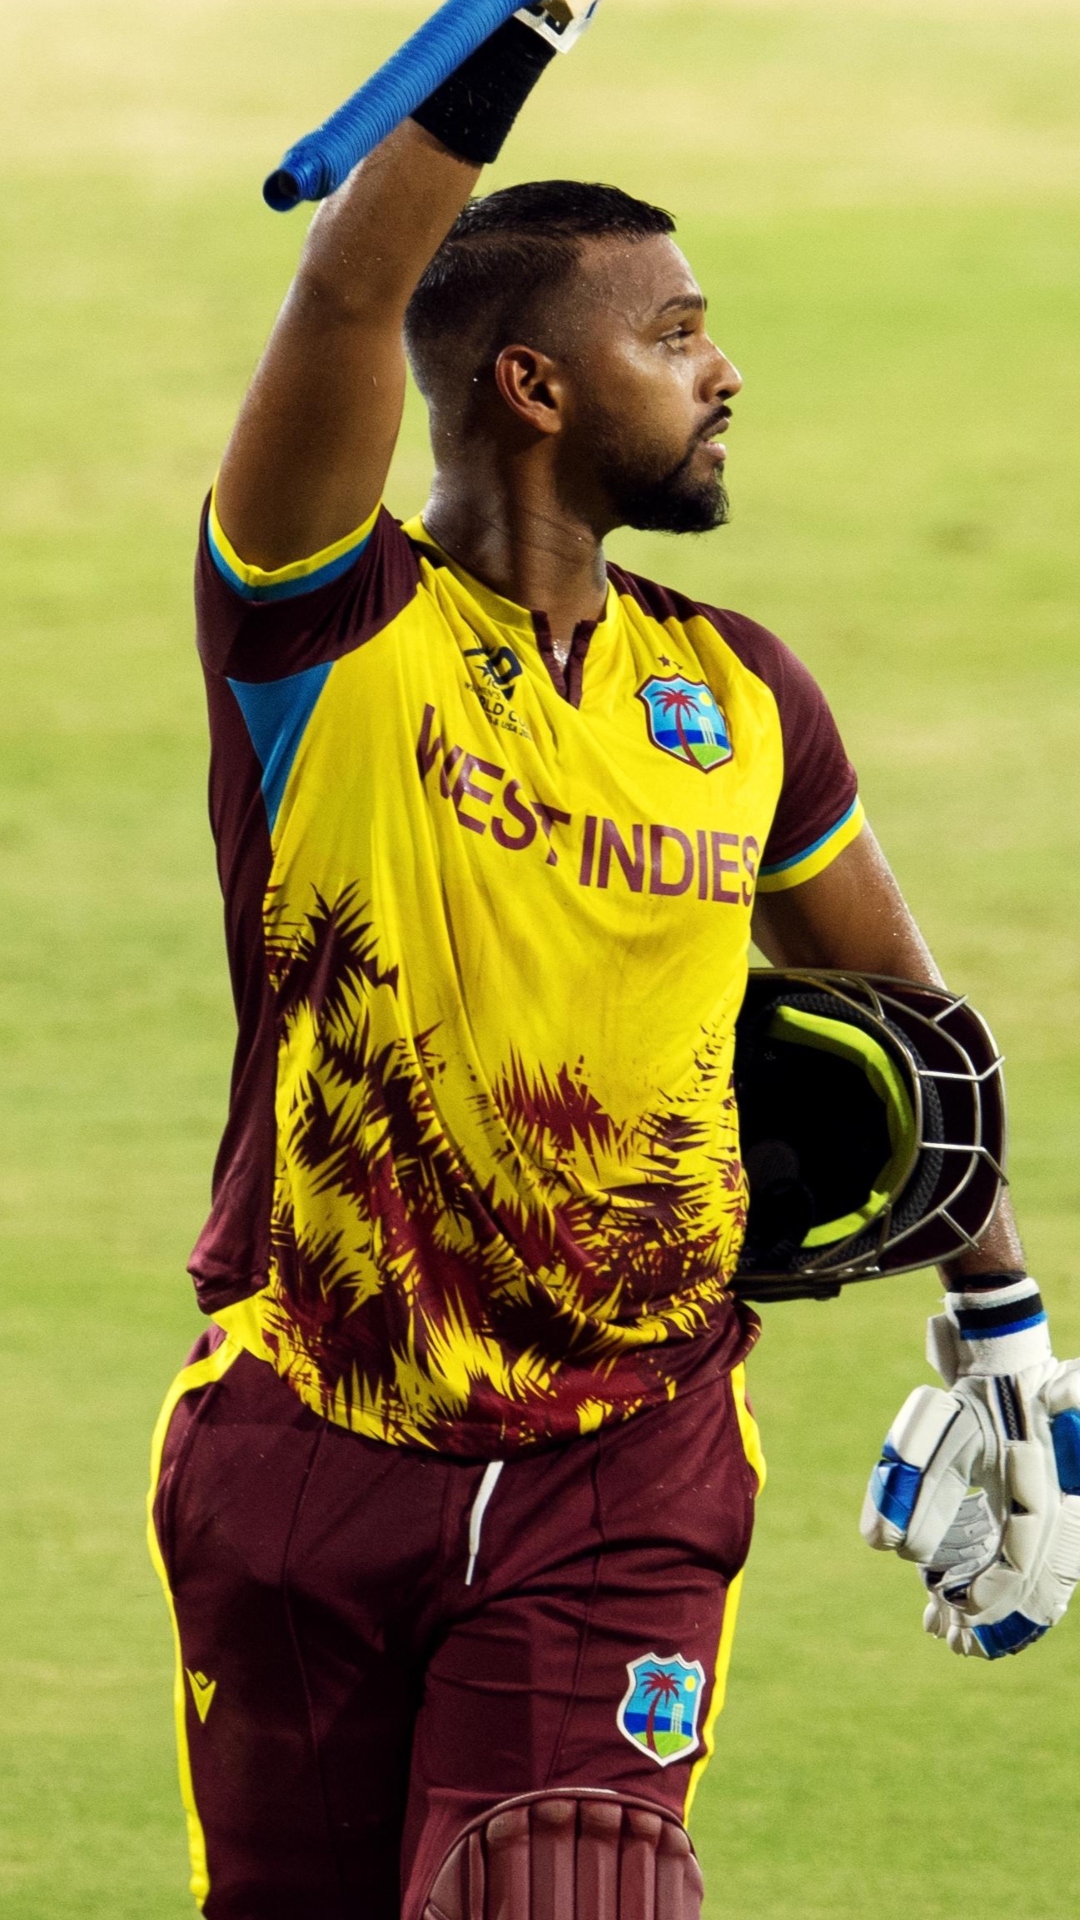 Players to be dismissed in nervous 90s in T20 World Cup, Nicholas Pooran falls for 98 vs Afghanistan